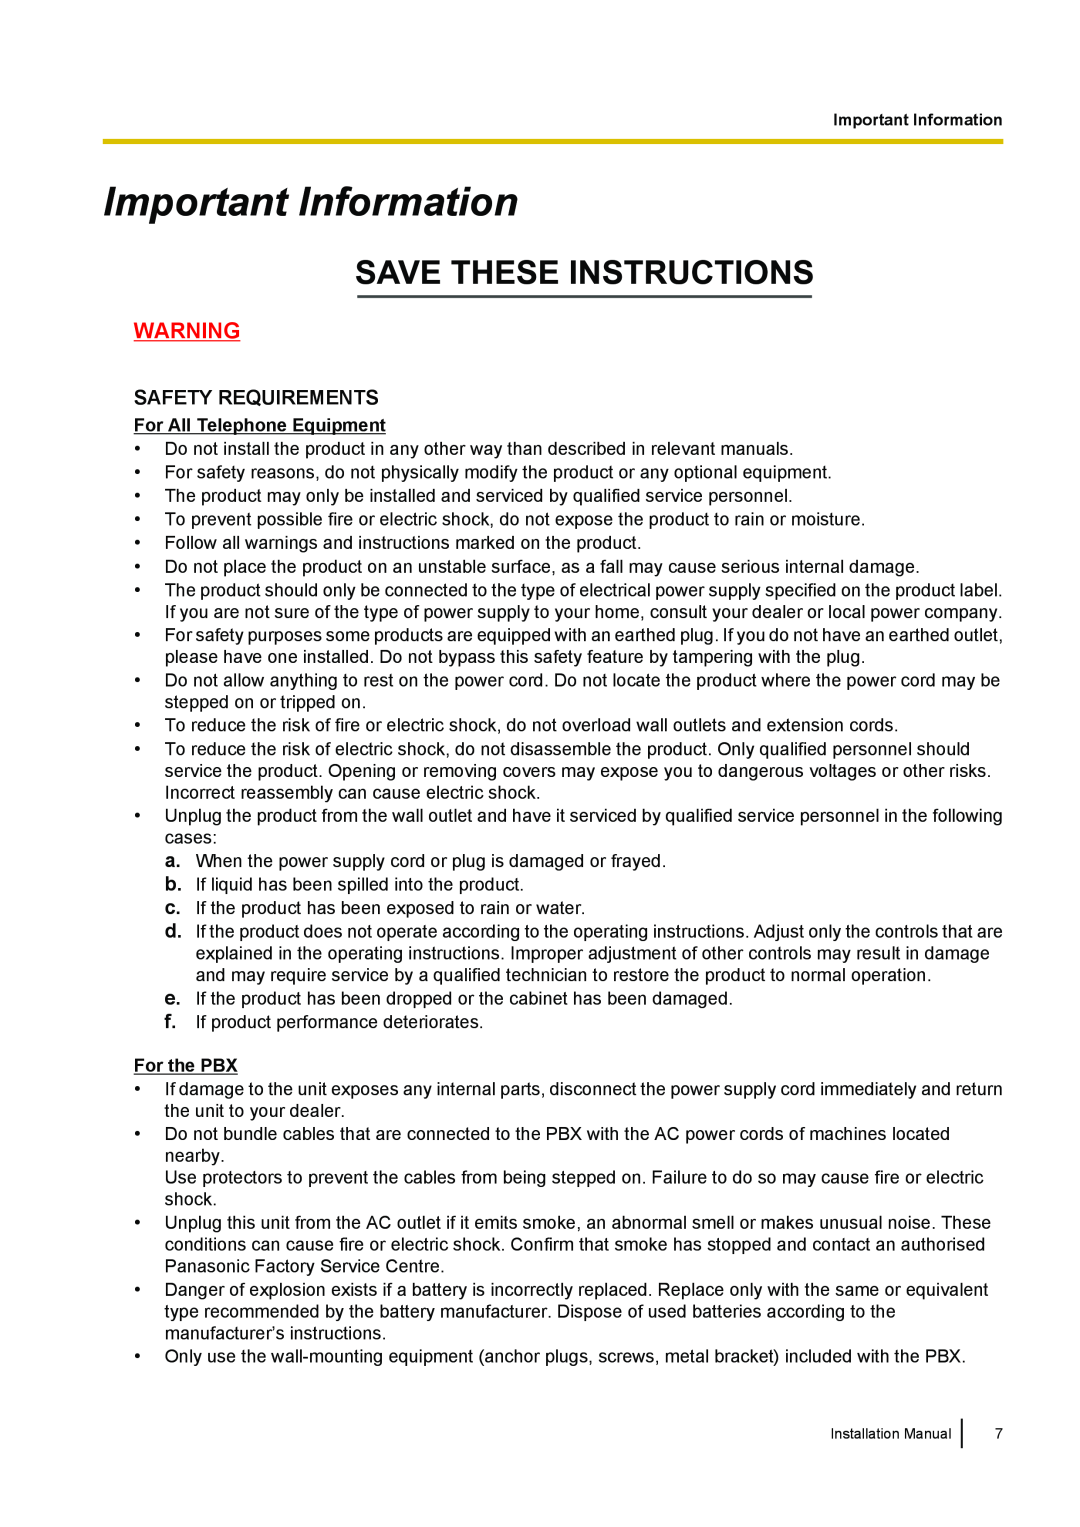 Panasonic KX-TDA100 Important Information, Save These Instructions, Safety Requirements, For All Telephone Equipment 